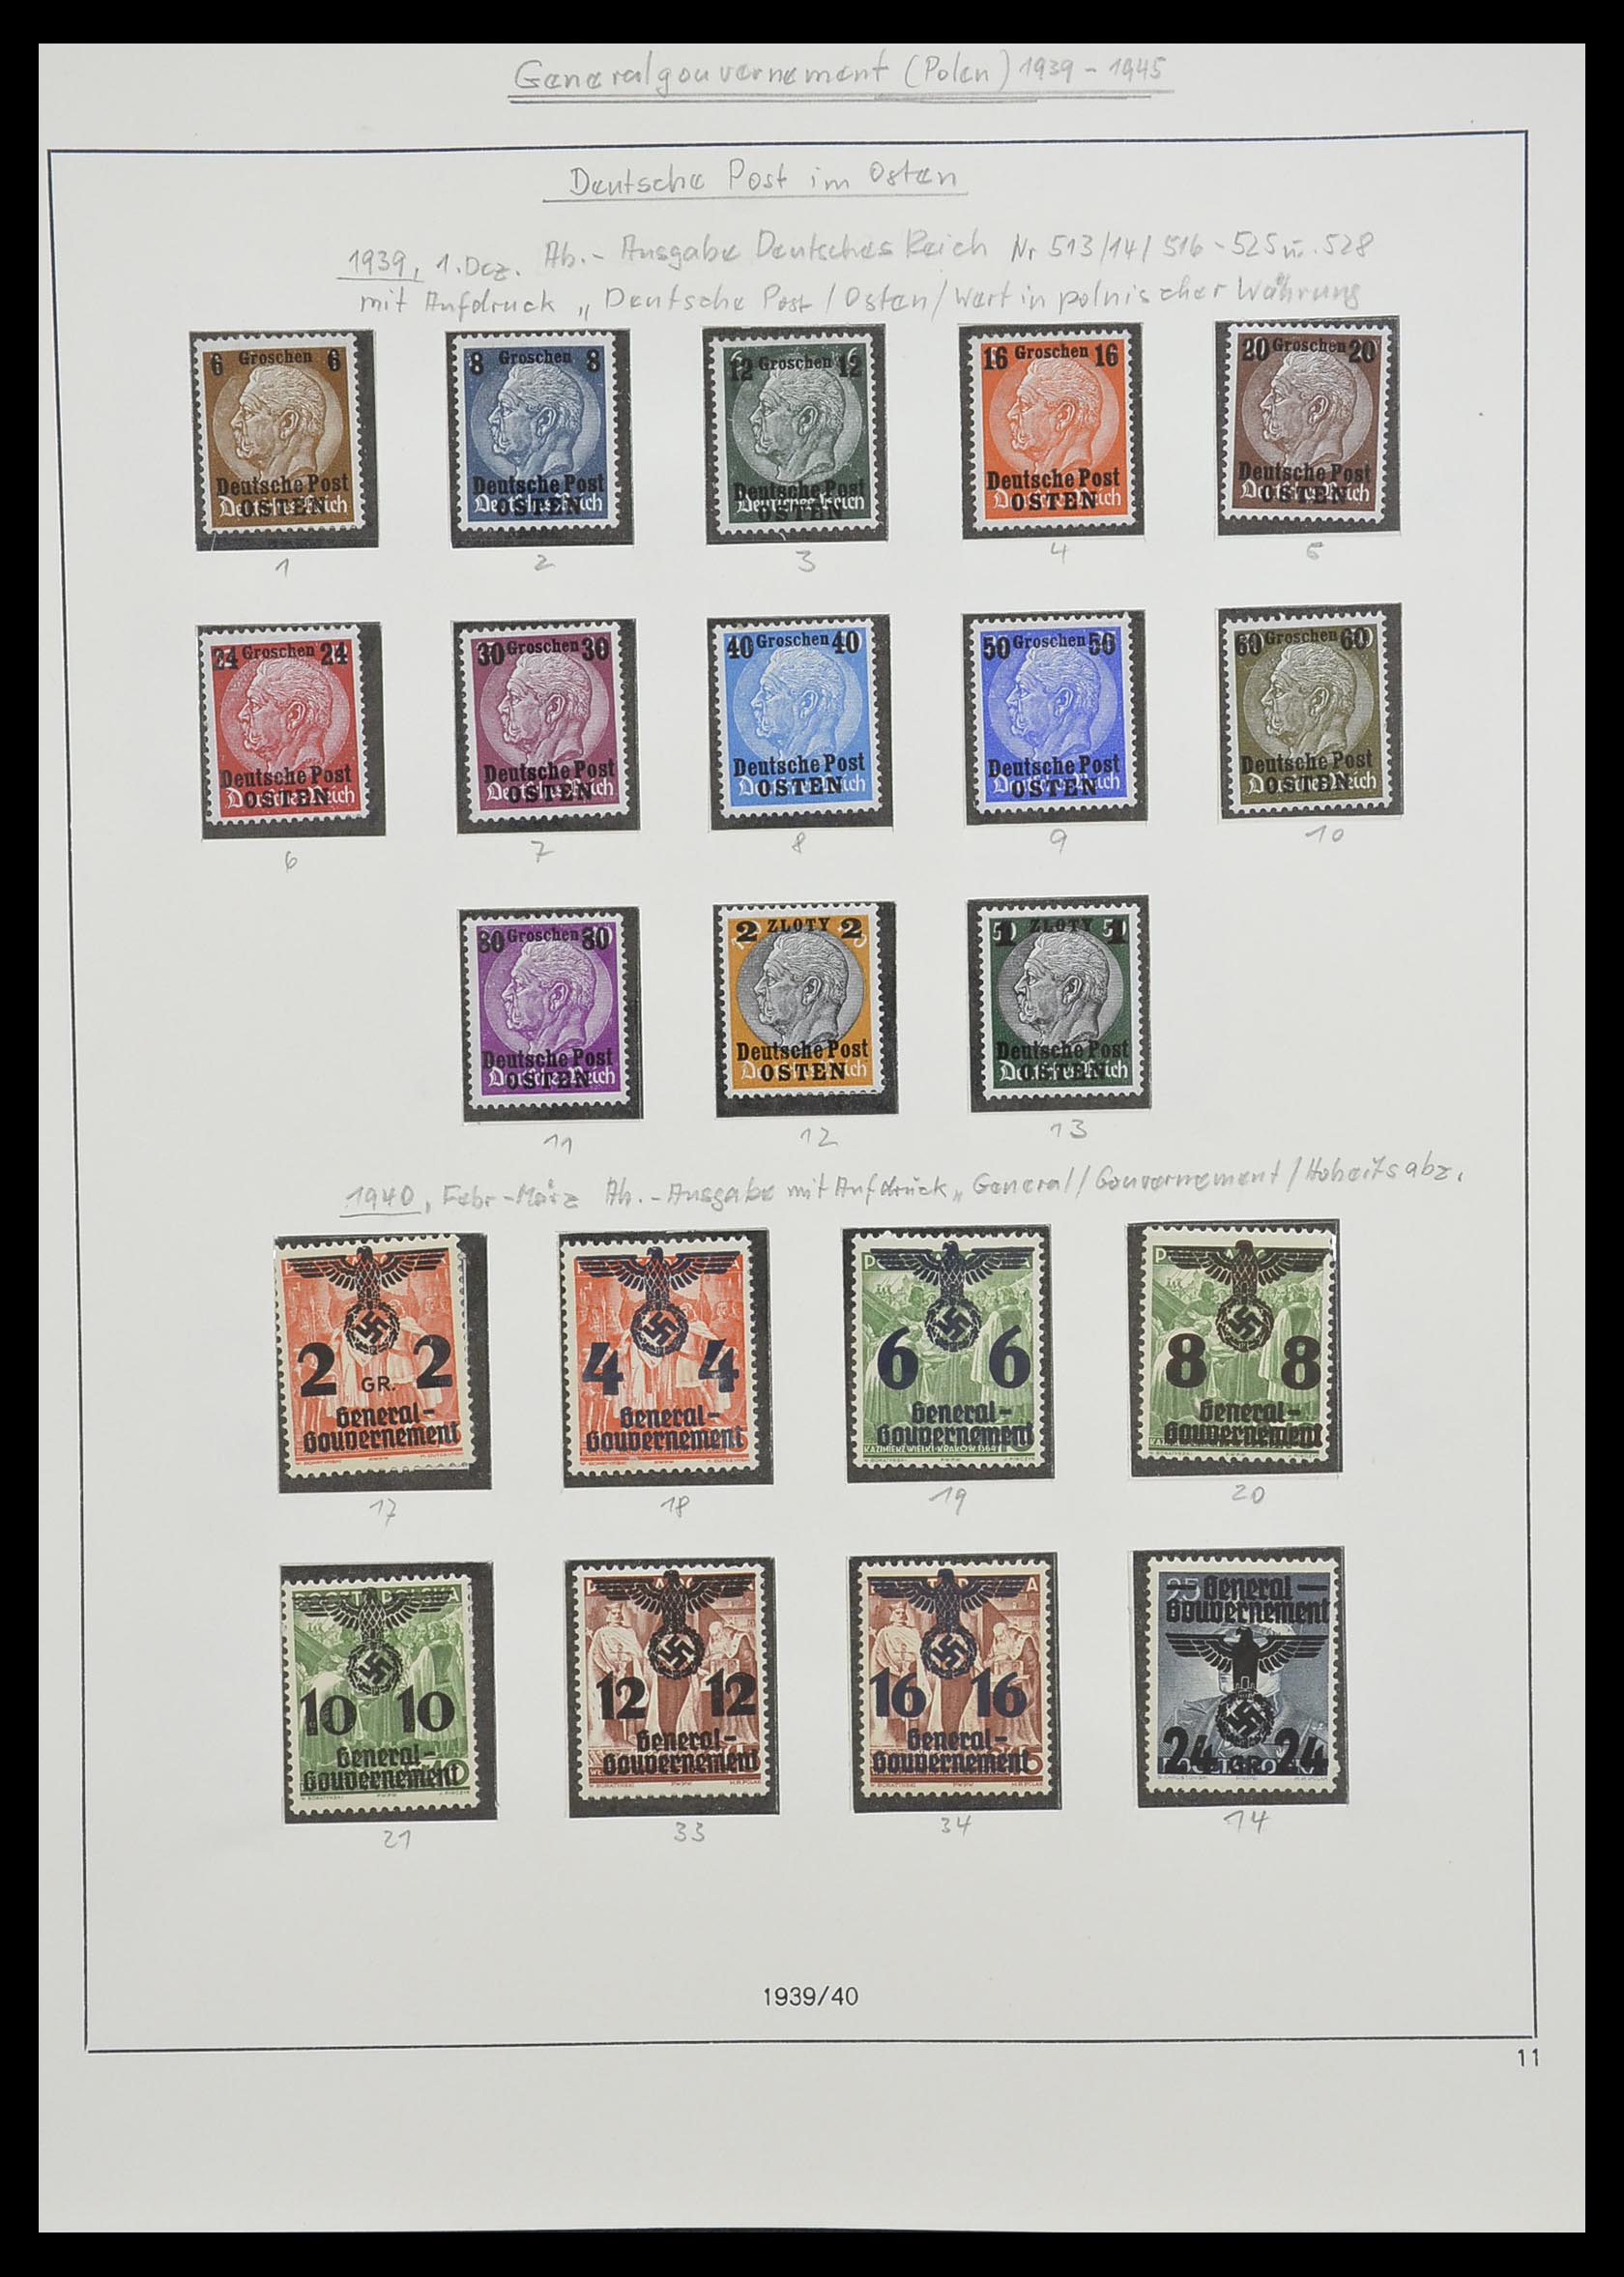 33235 012 - Stamp collection 33235 German occupation WW II 1938-1945.